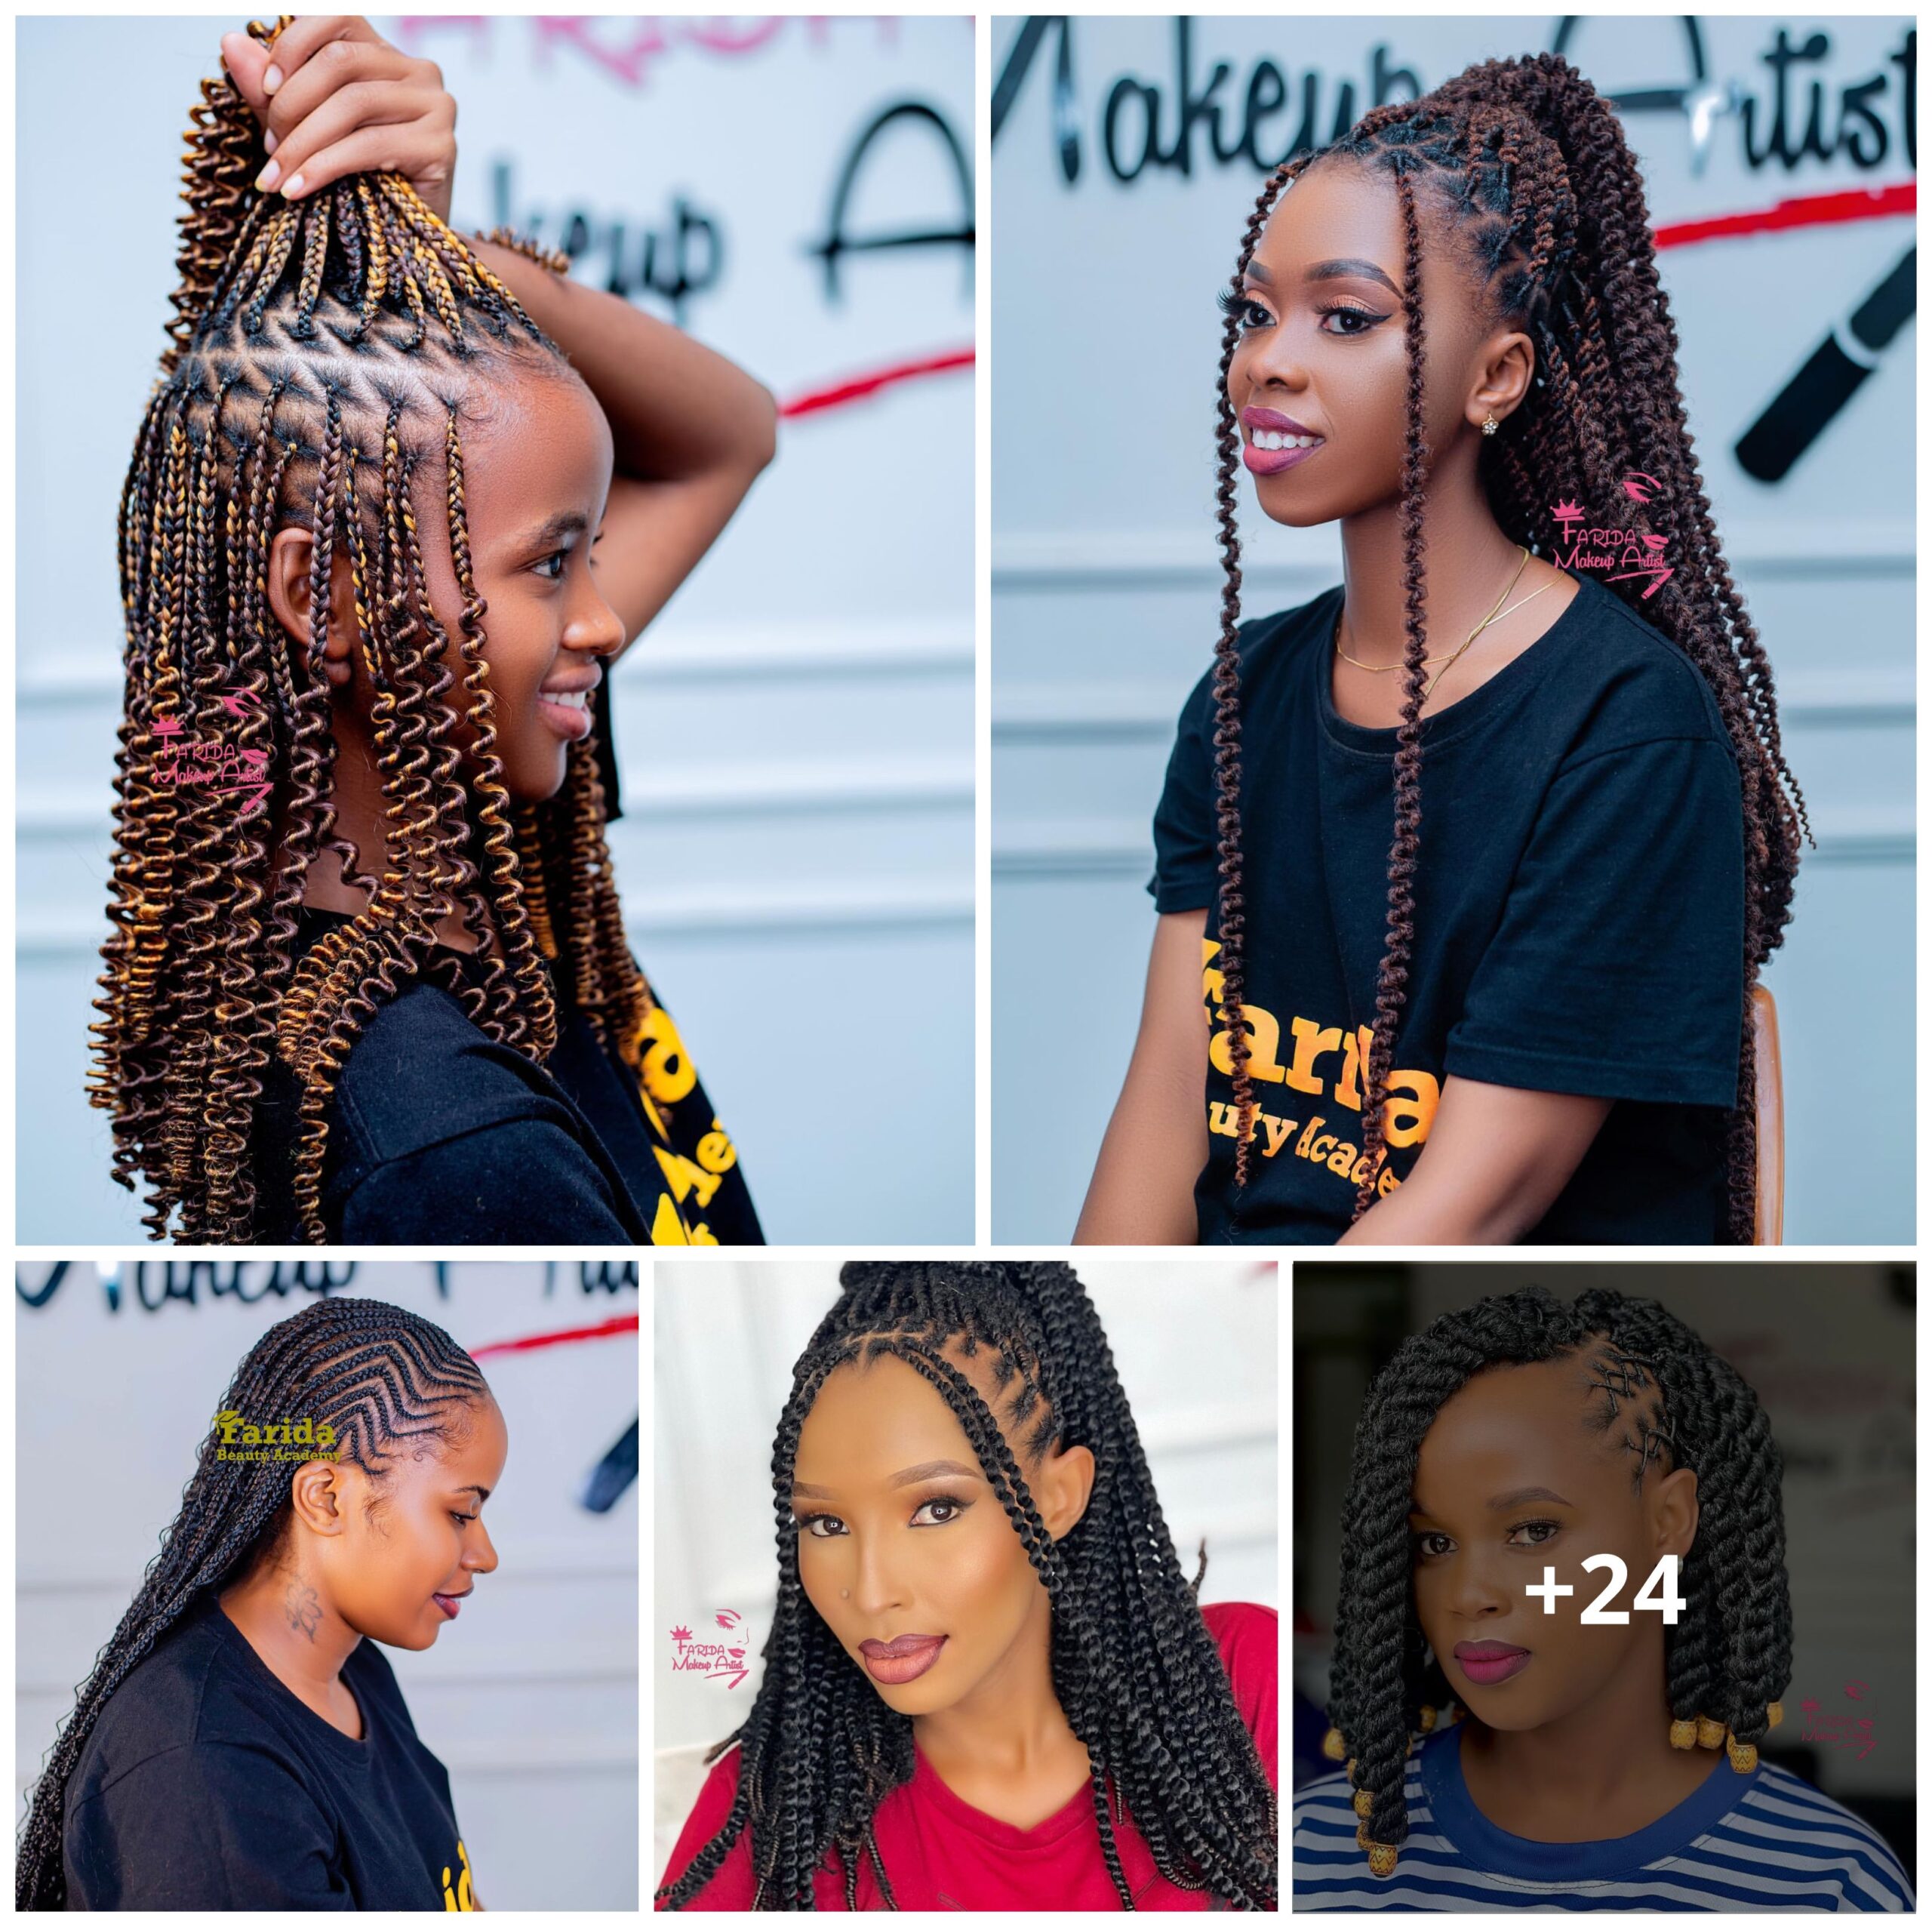 24+ Stunning Braided Hairstyles for Women: Perfect the Art of Braiding for an Eye-Catching Style